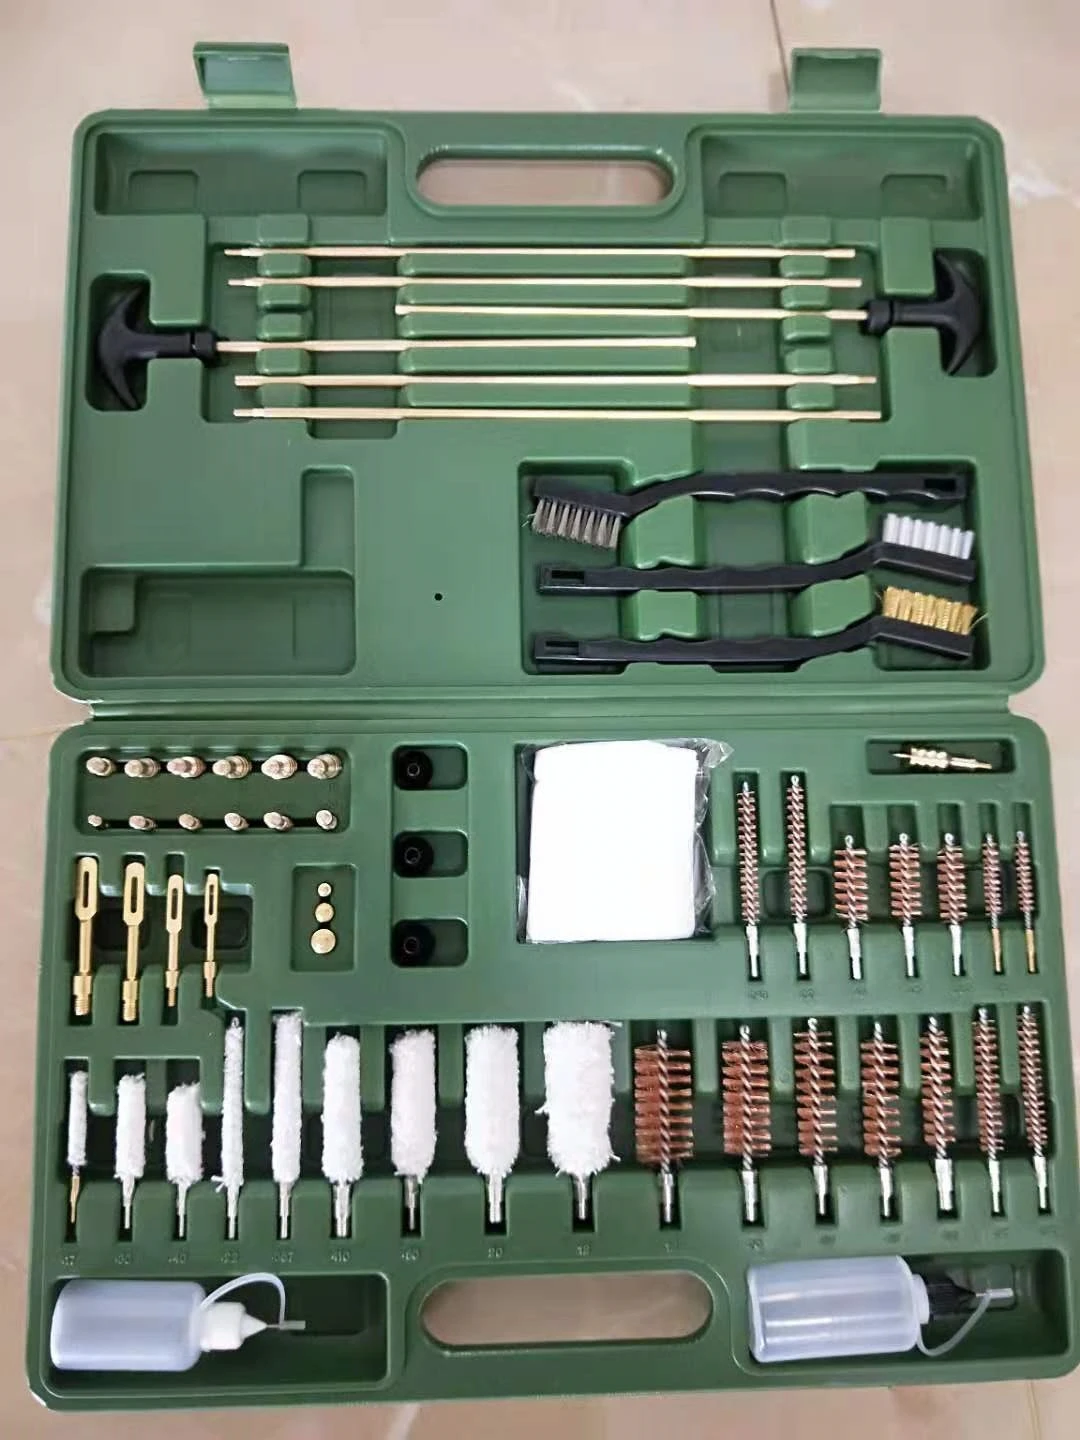 All In One Complete Brass Universal Hunting Gun Cleaning Kit For Shotguns Rifles Pistol Gun Care Hotsales On Amazon Buy Universal Gun Cleaning Brush Tool Hunting Cleaning Brush Handtool Gun Cleaning Tool For Outdoor Product